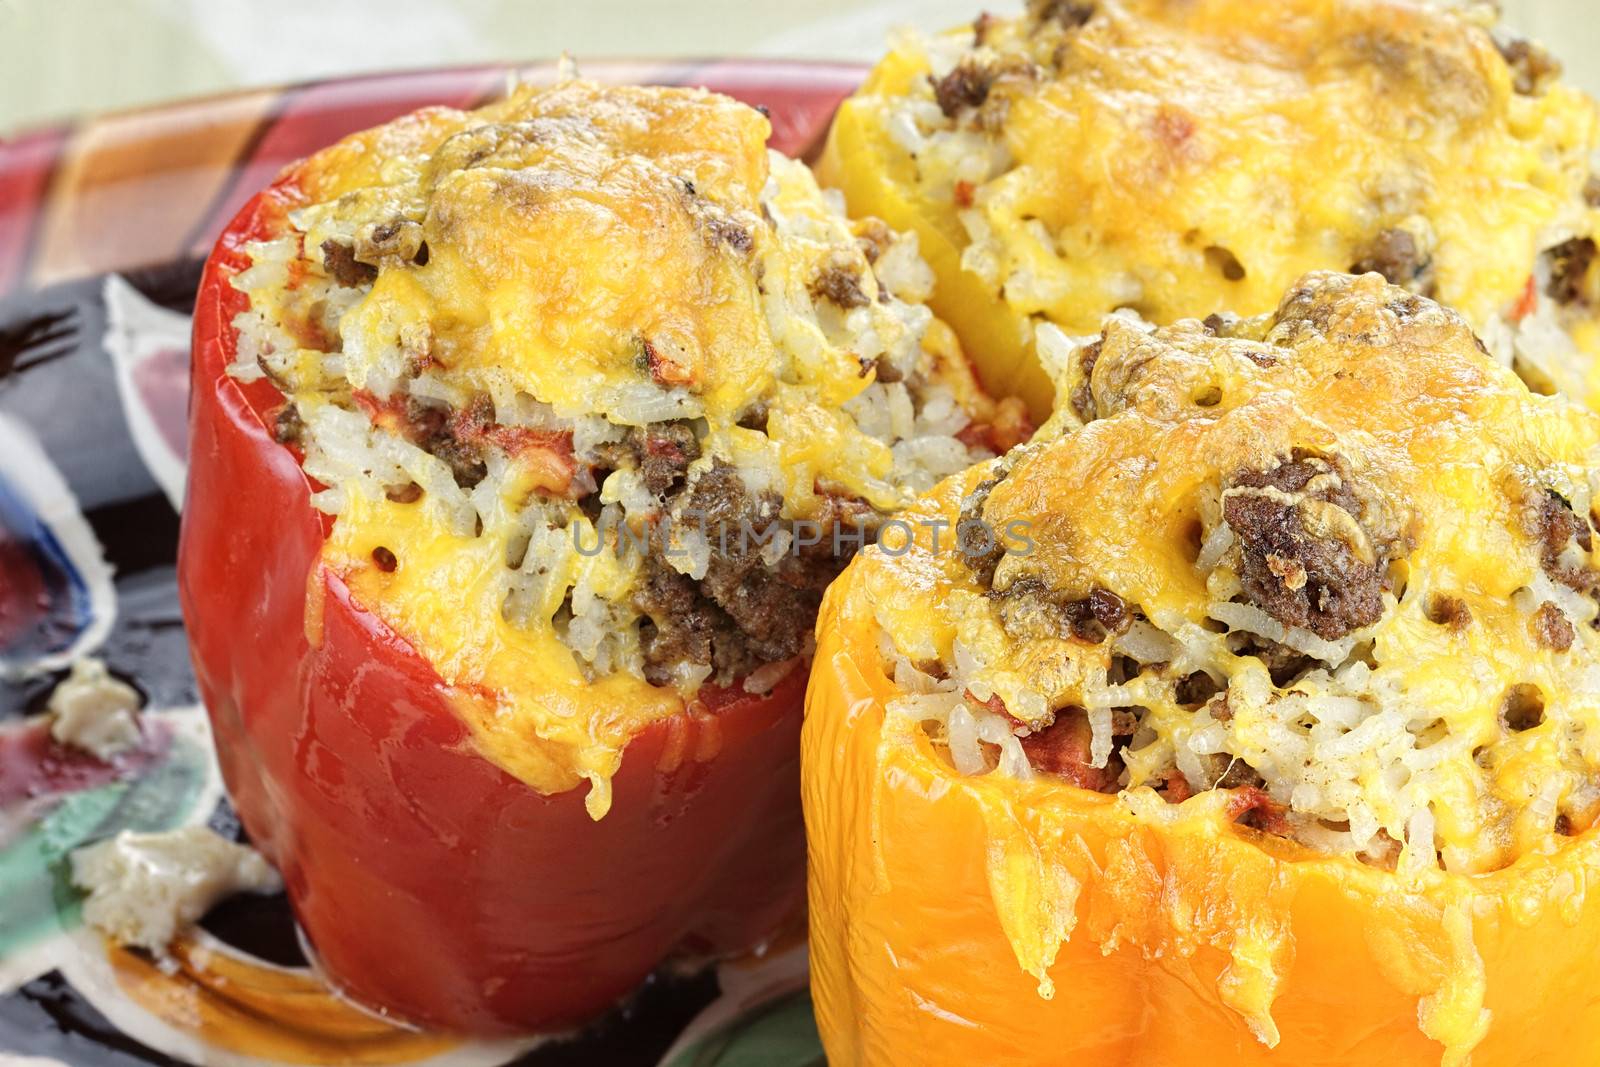 Colorful Stuffed Bell Peppers by StephanieFrey